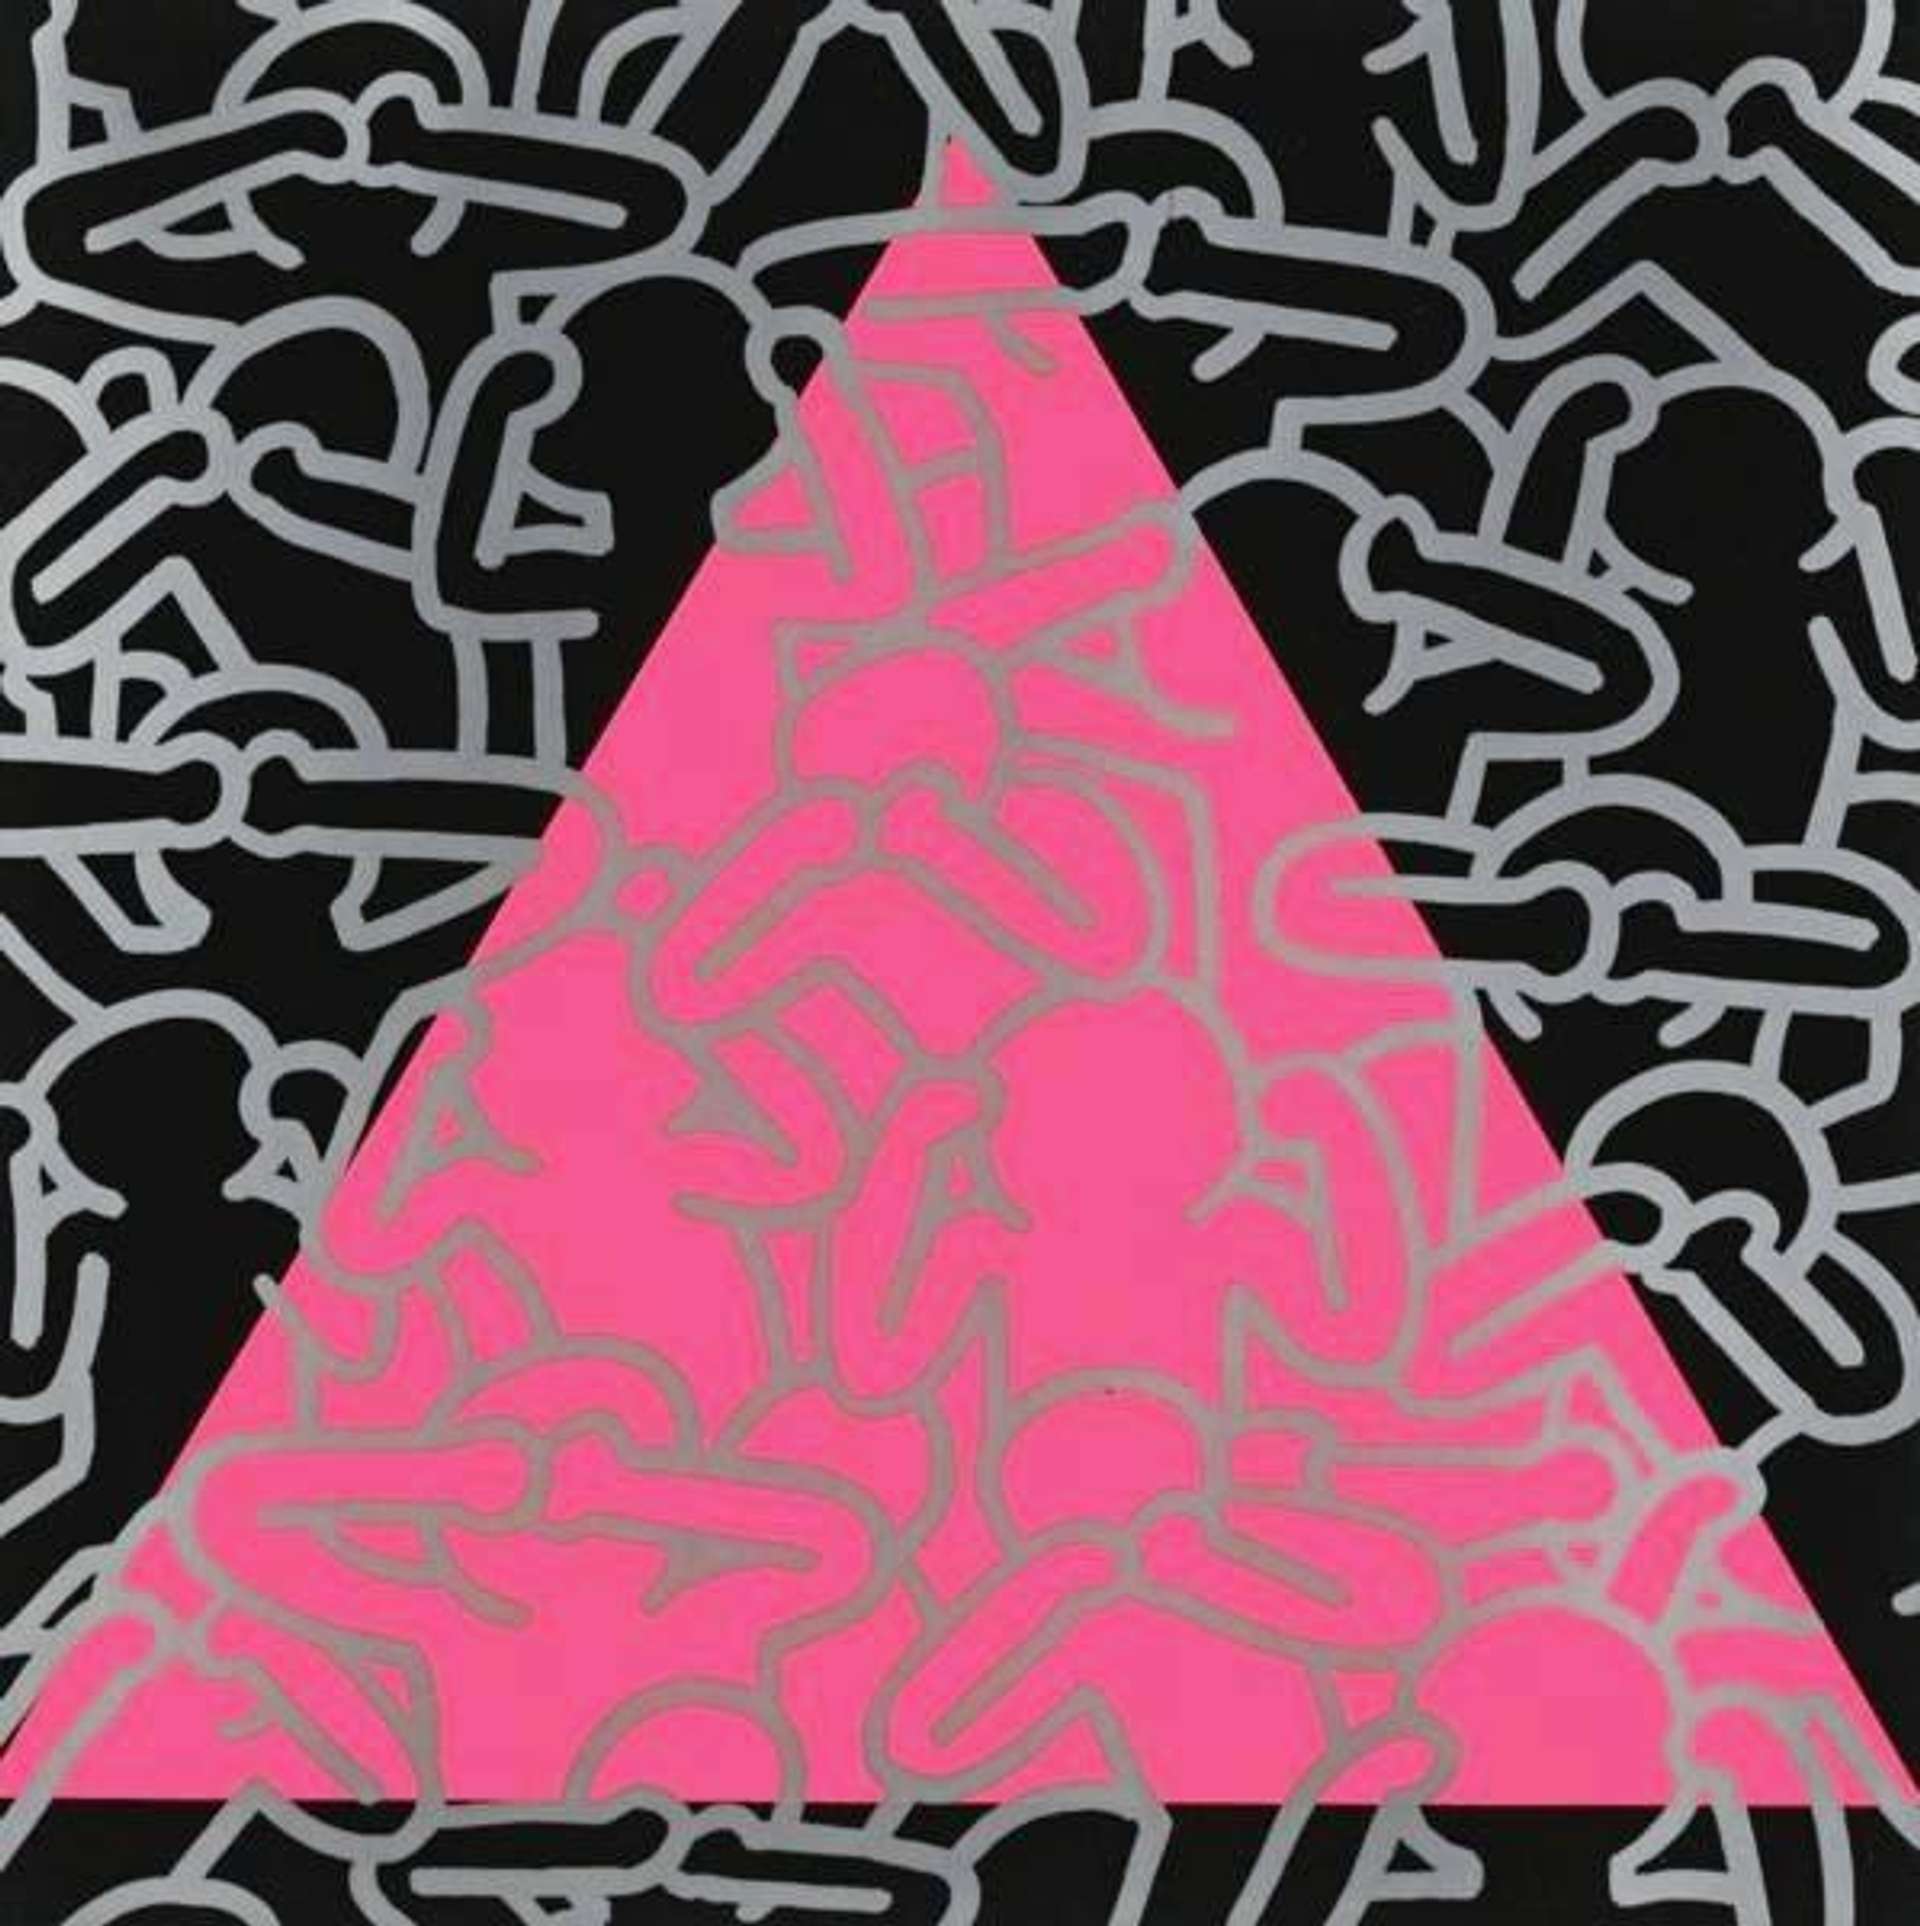 Silence Equals Death by Keith Haring - MyArtBroker